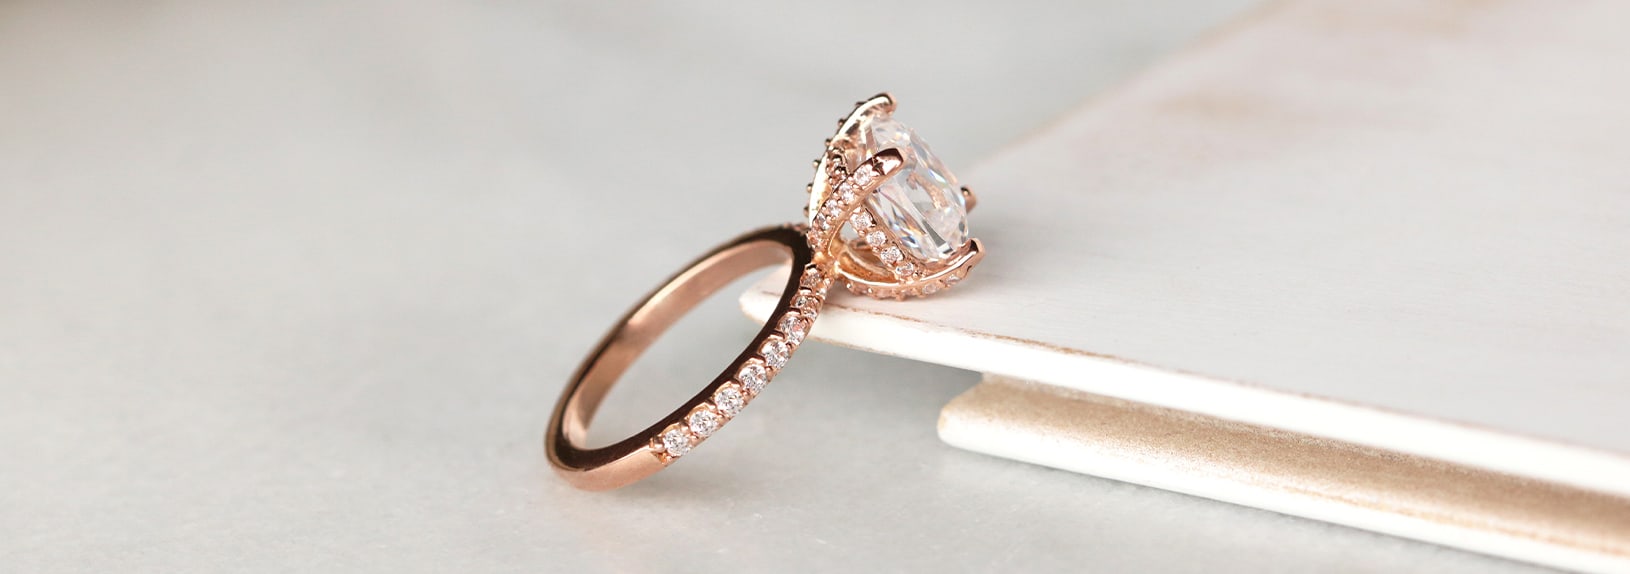 10 Unique Engagement Rings to Add to Your Wish List BridalGuide